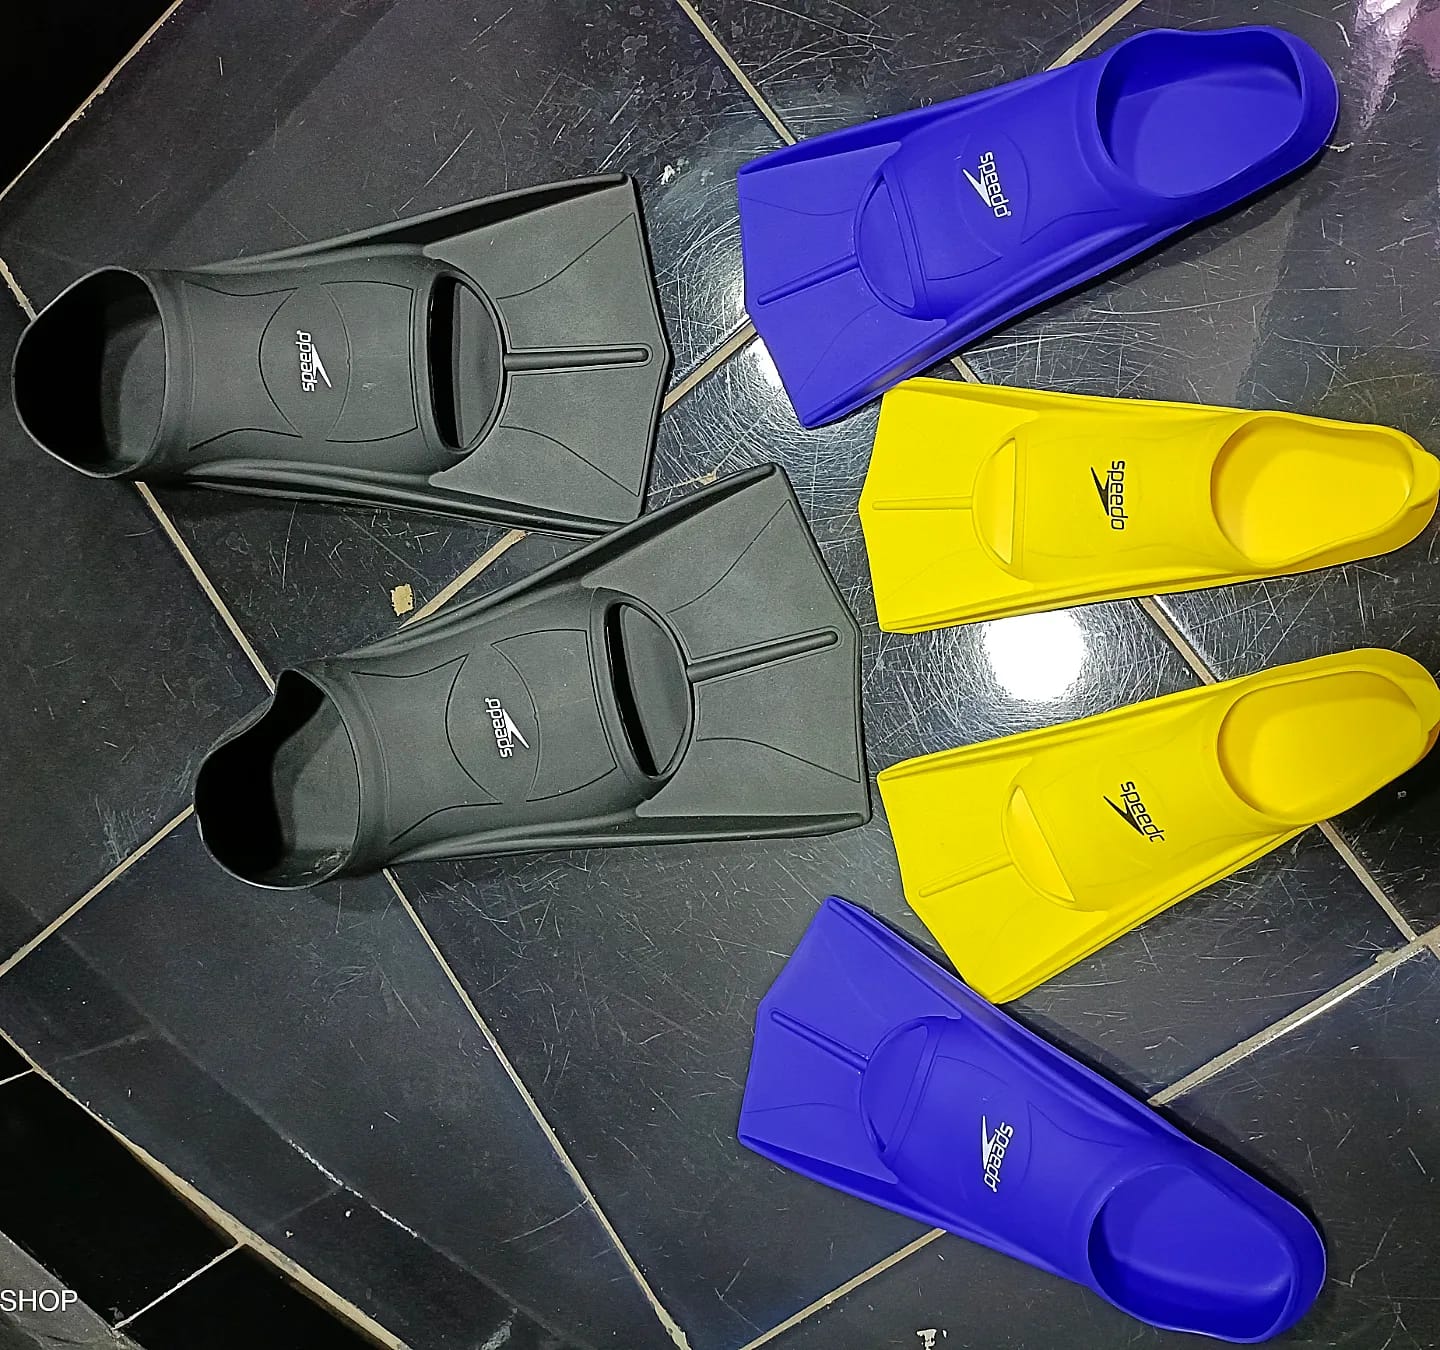 Long and short Swimming fins